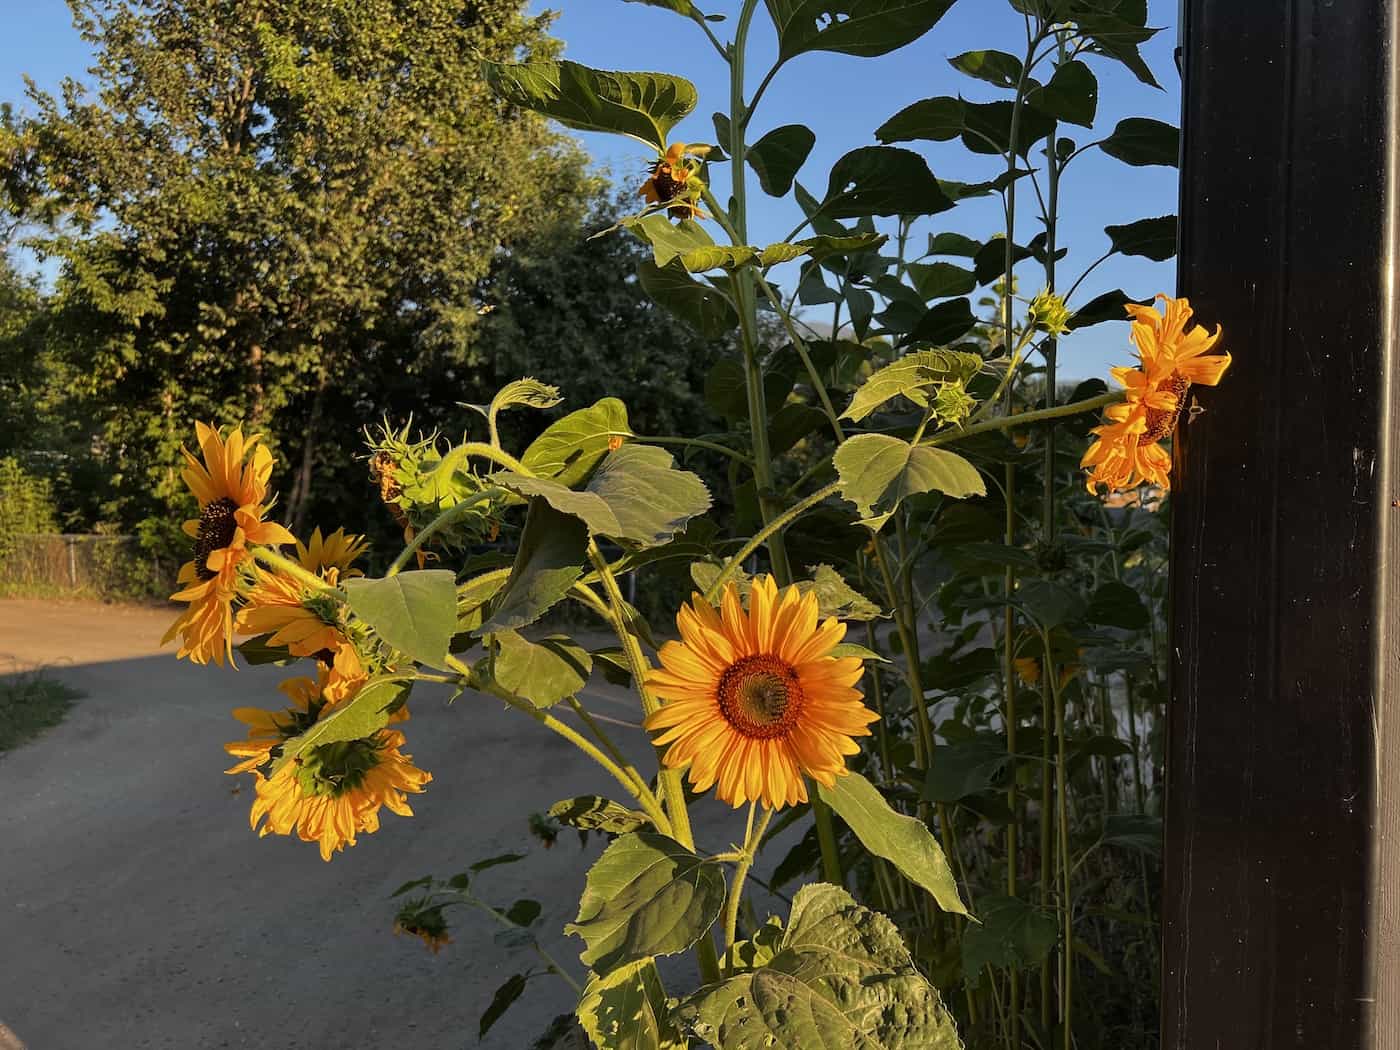 Sunflowers in the lane